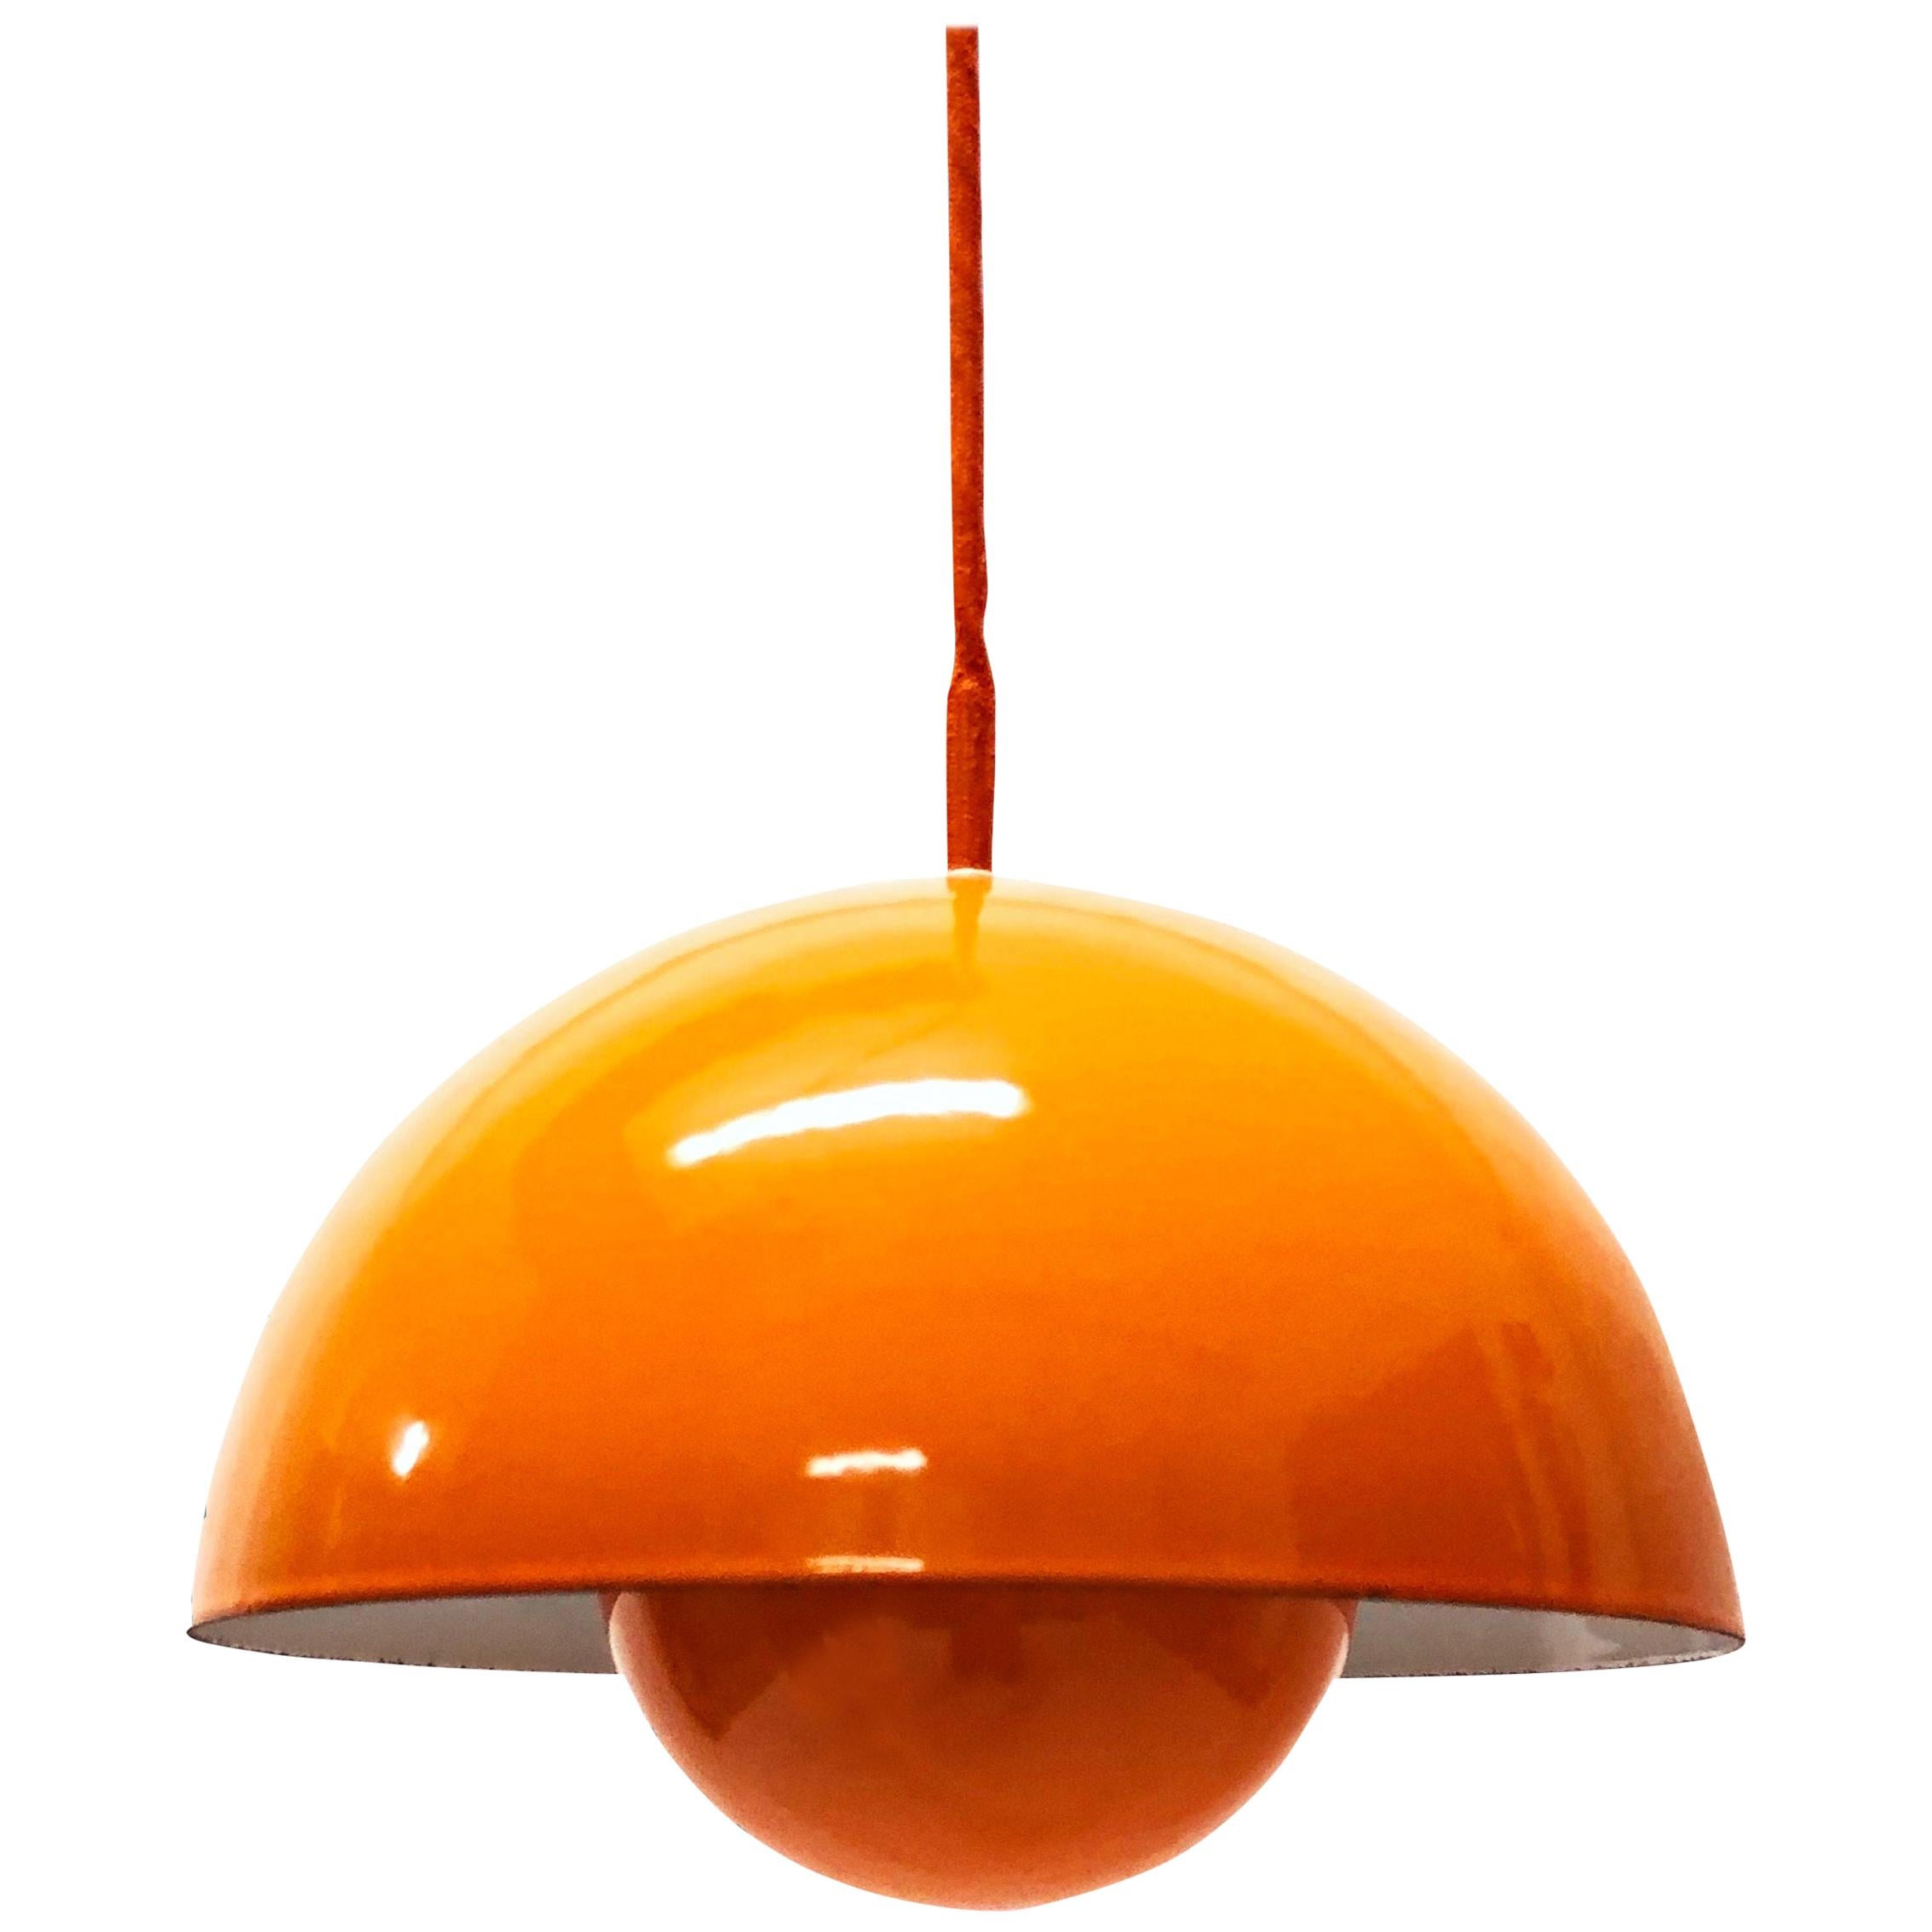 Verner Panton flowerpot pendant lights designed for Louis Poulsen in 1969.

This set of two yellow pendant lights are an early example of the Panton flowerpot model and feature an orange enamel lampshade consisting of two semi-circular spheres